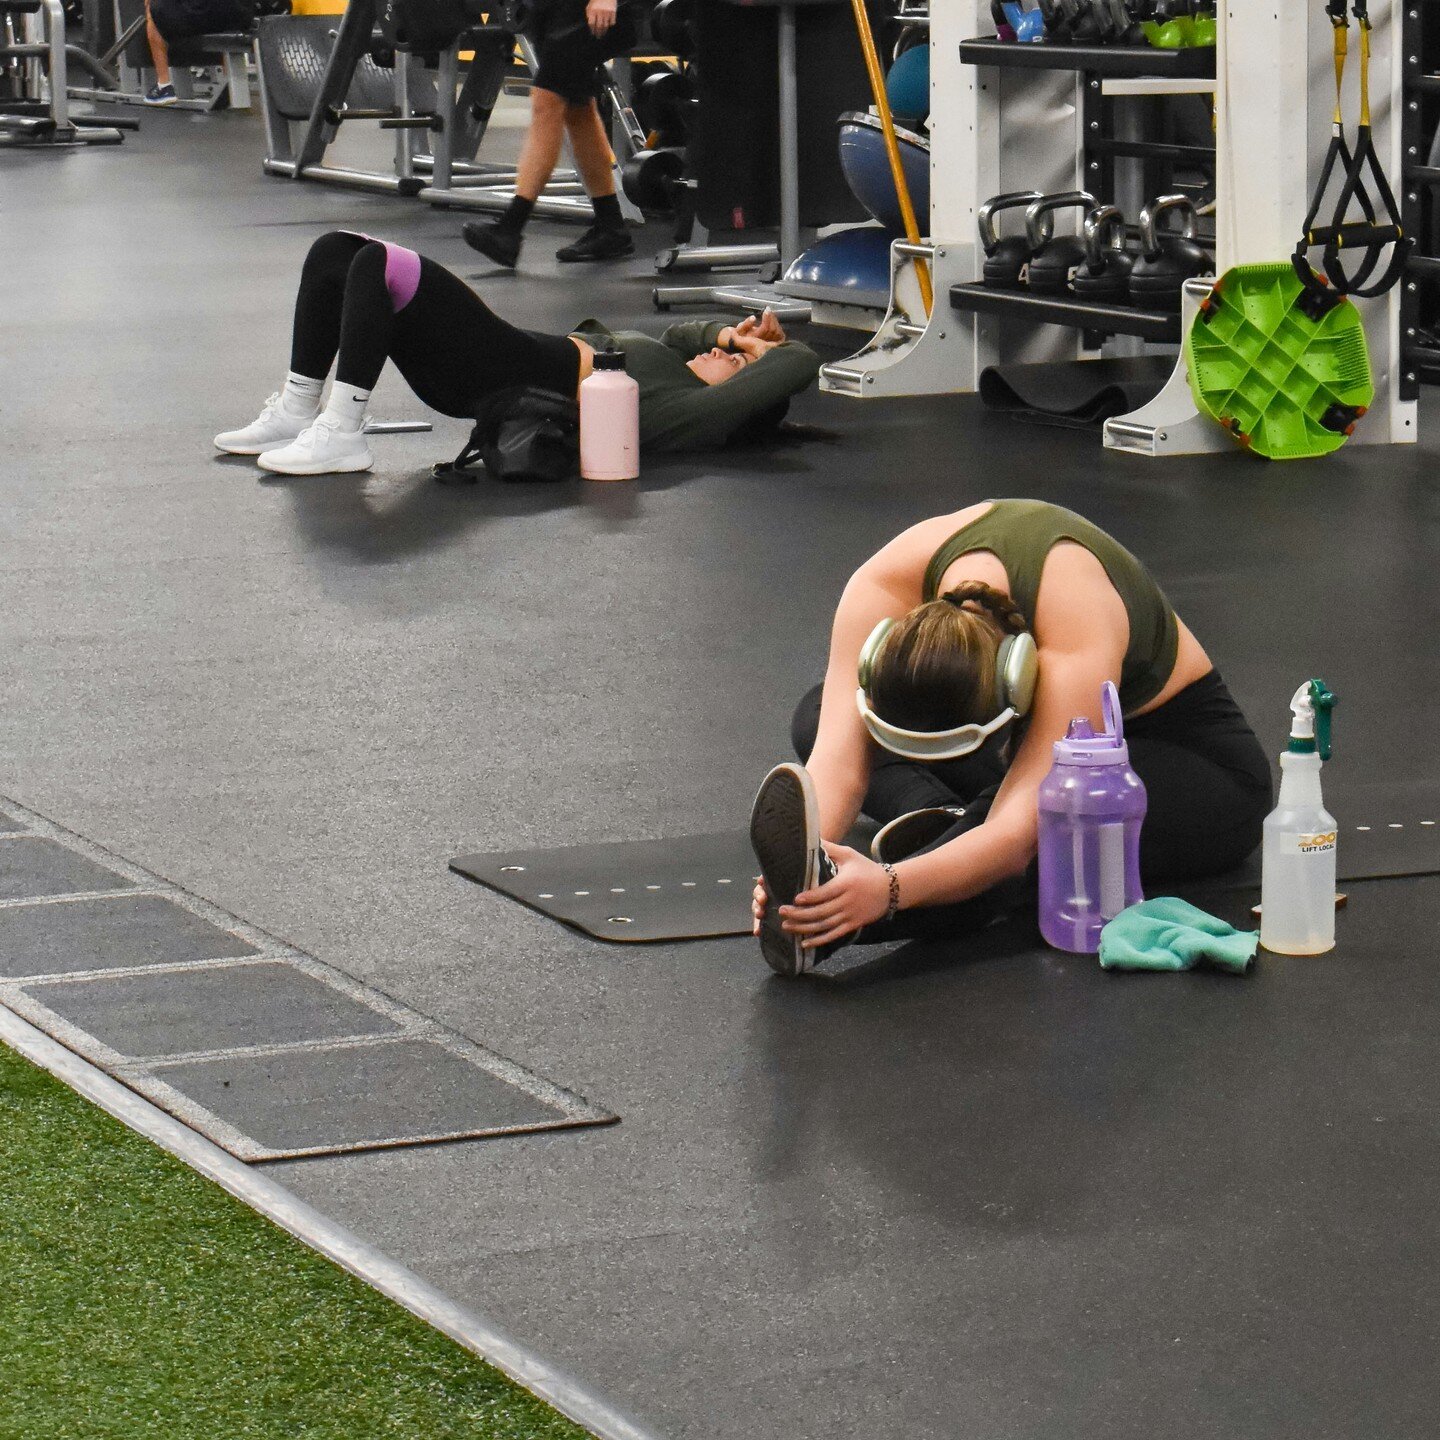 Here's why post-workout stretching is a game-changer:

⚡️It allows your heart to gracefully return to its normal rhythm, promoting a healthy cooldown
⚡️Helps to alleviate muscle soreness by minimizing lactic acid buildup
⚡️It enhances your flexibilit